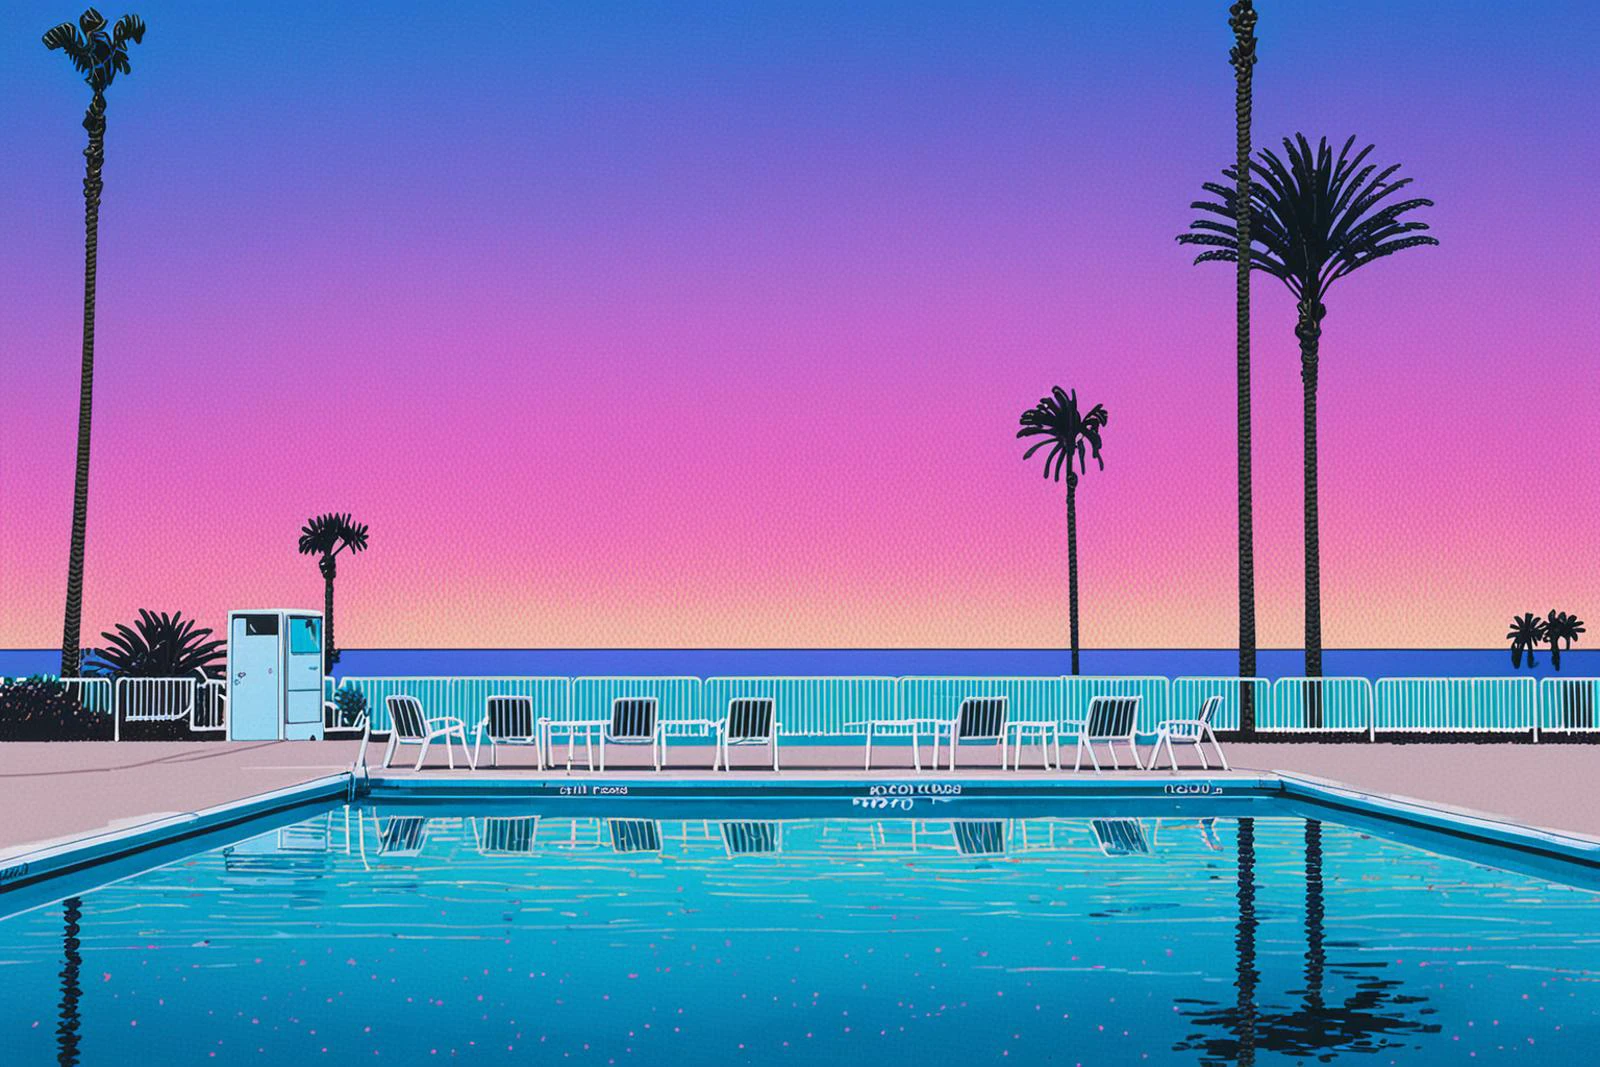 Lifted view of A 80's pool surrounded by beach and Palm Trees at sunset, グラデーションの空, 水の反射, 道, 椅子, 建物, 